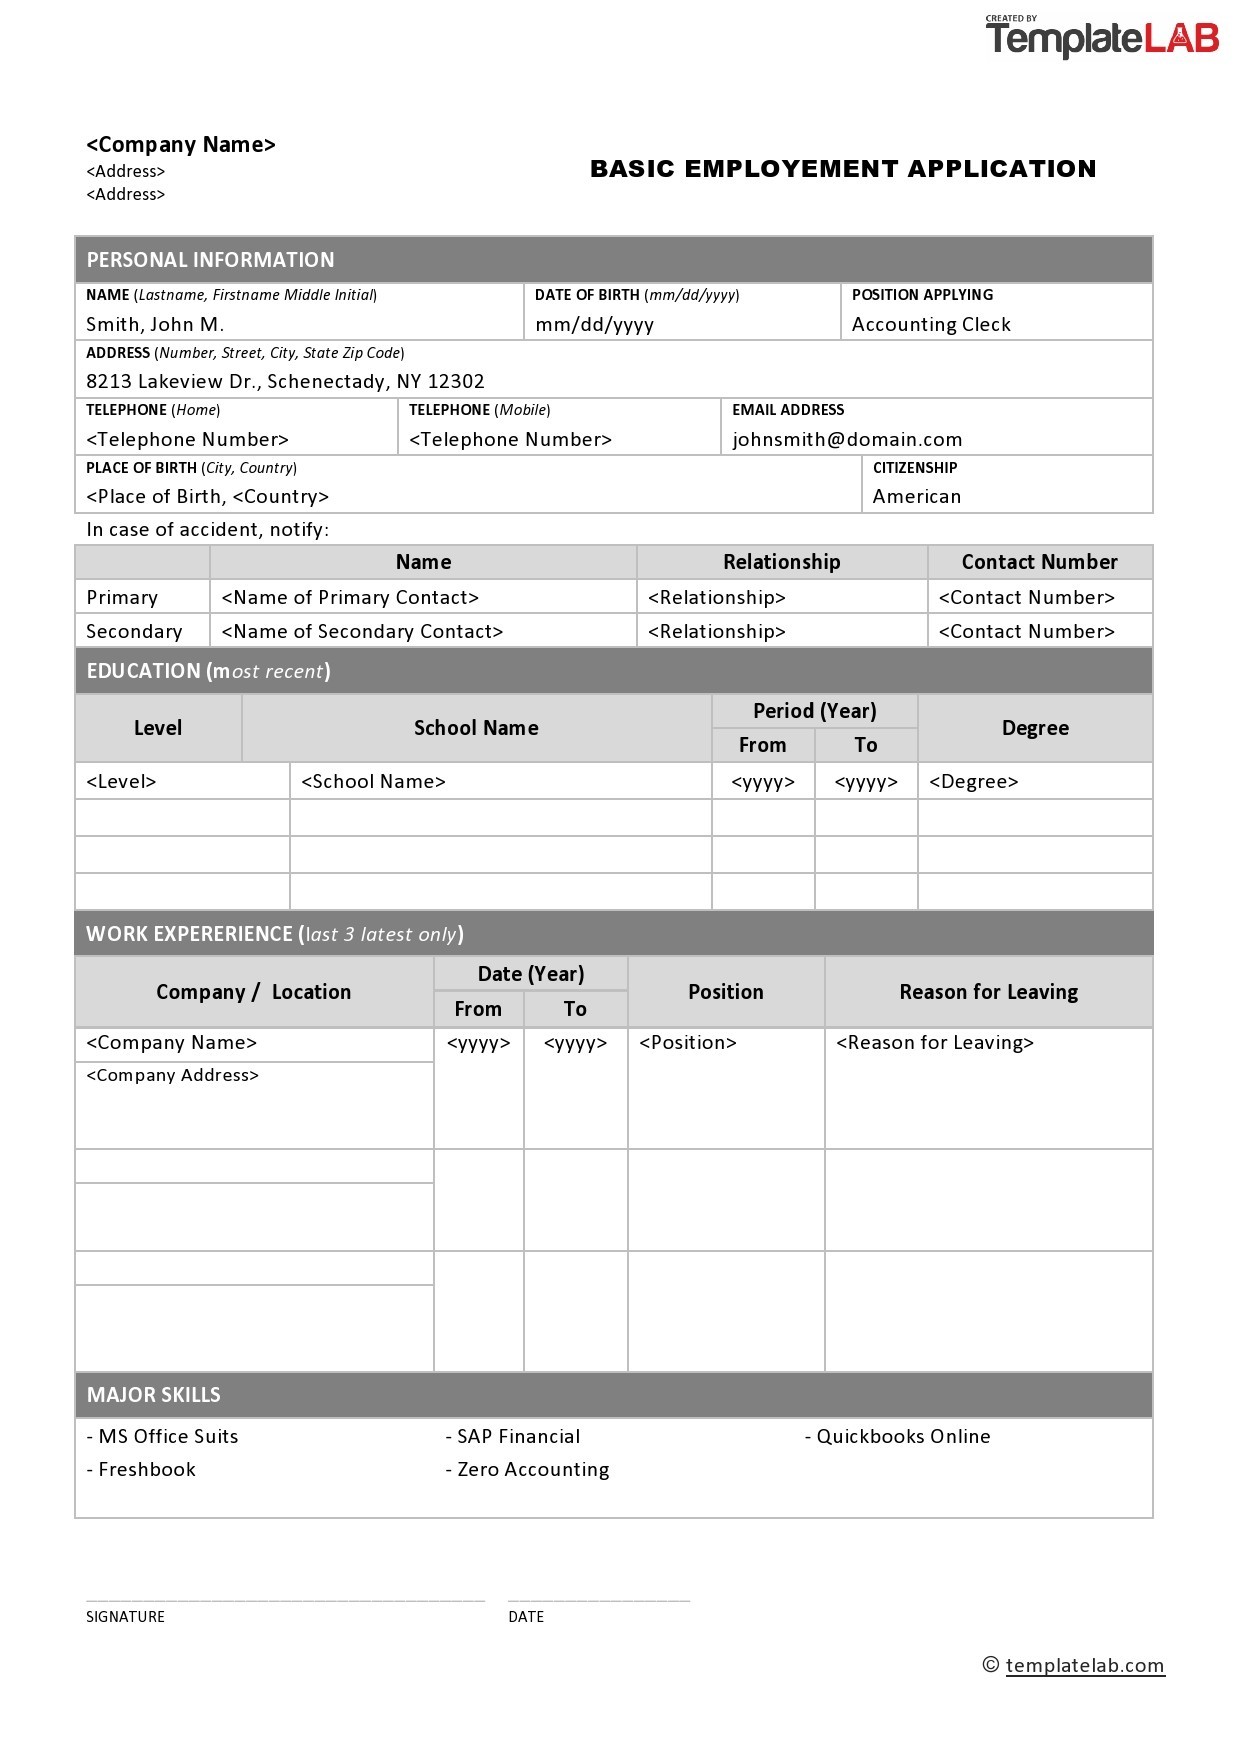 Employment Applications Printable Template from templatelab.com